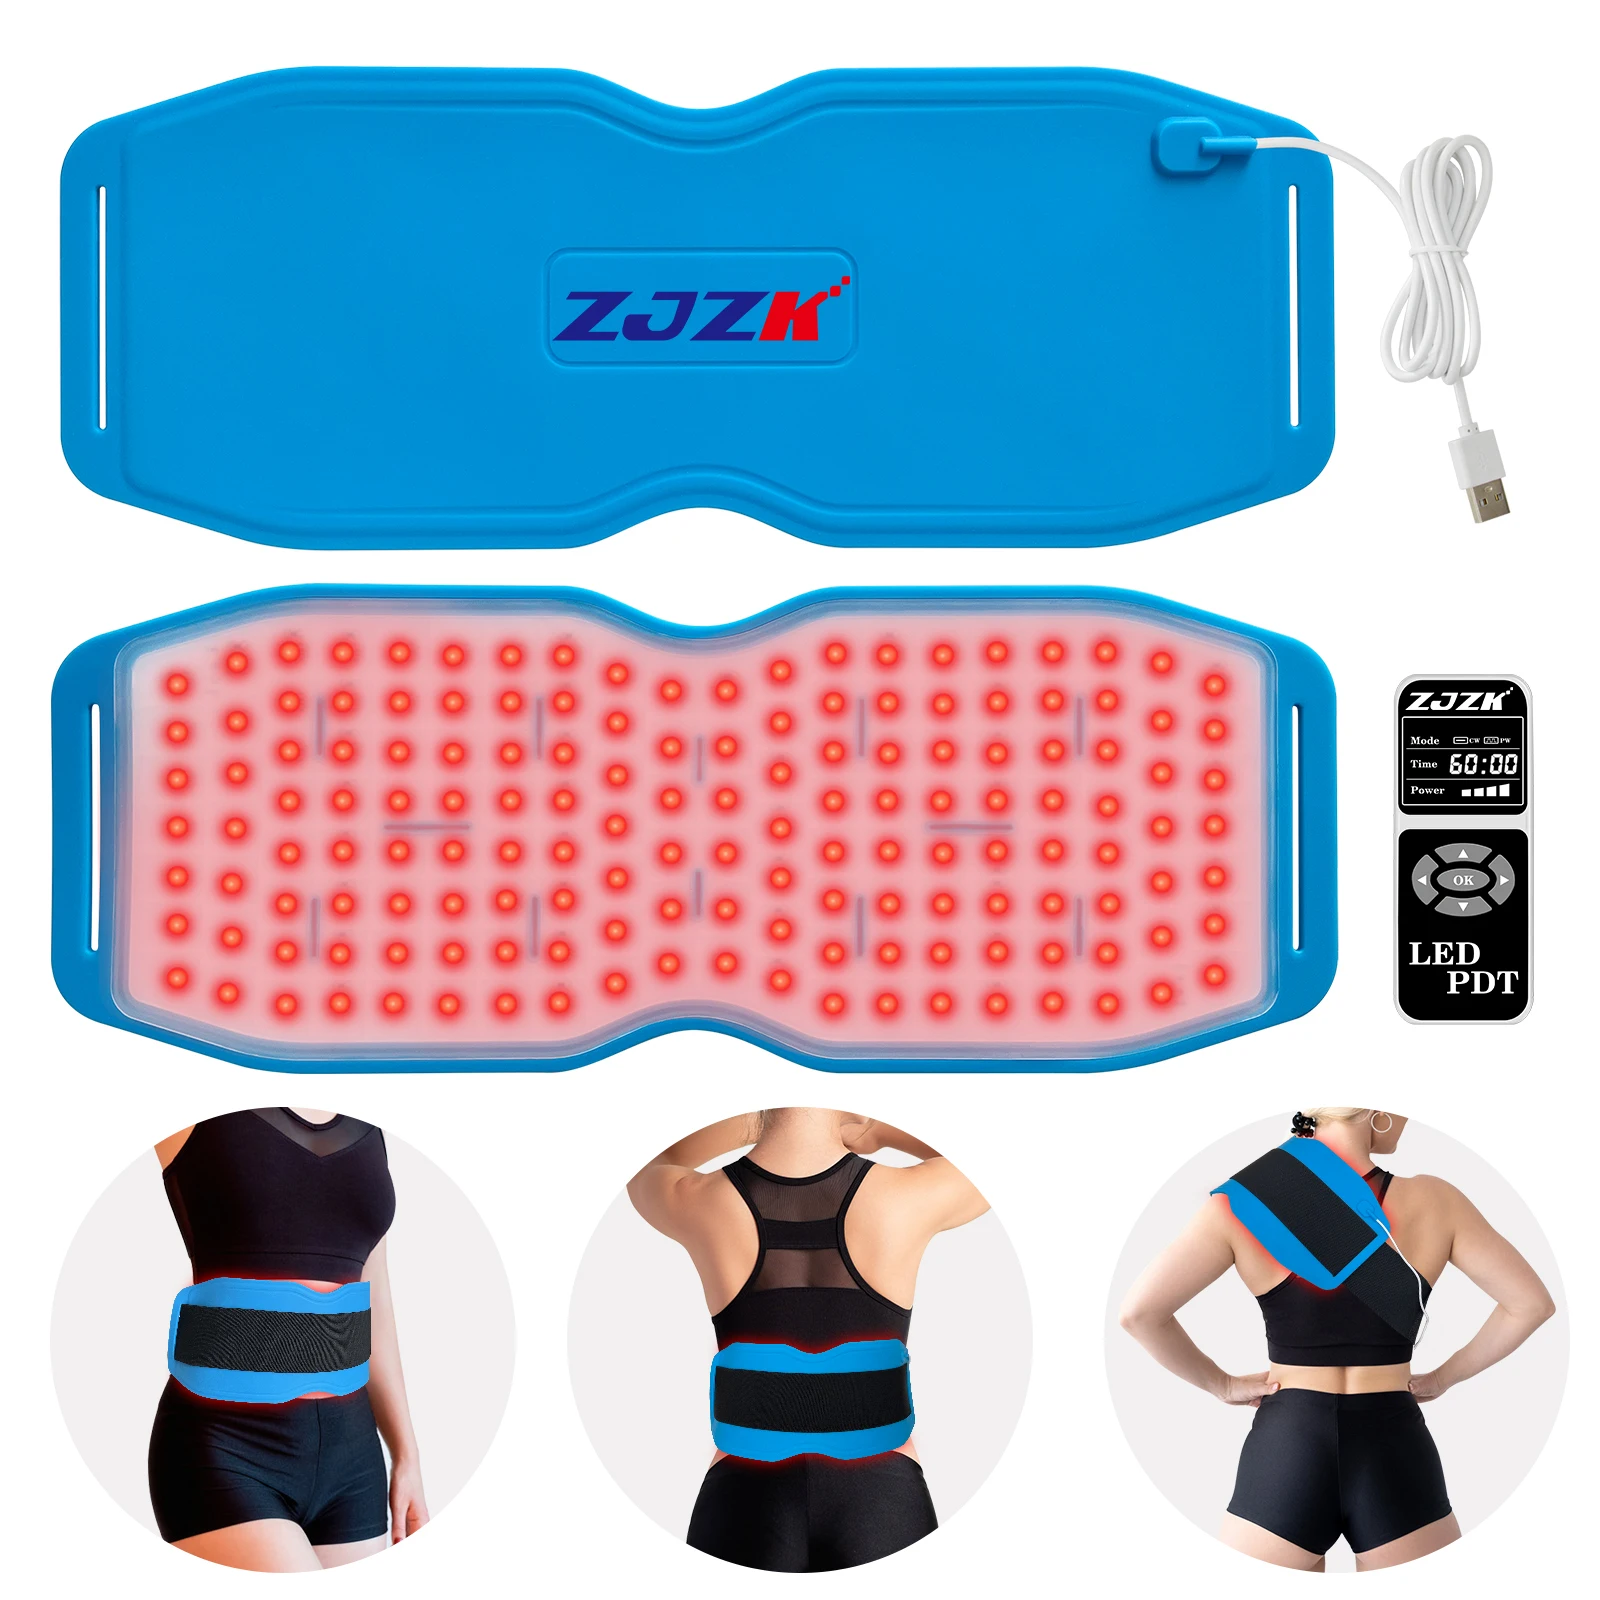 

ZJZK 660nm light therapy pad 850nmx150chips+940nmx150chips relief infrared led panel ankles promoting cell growth and repair